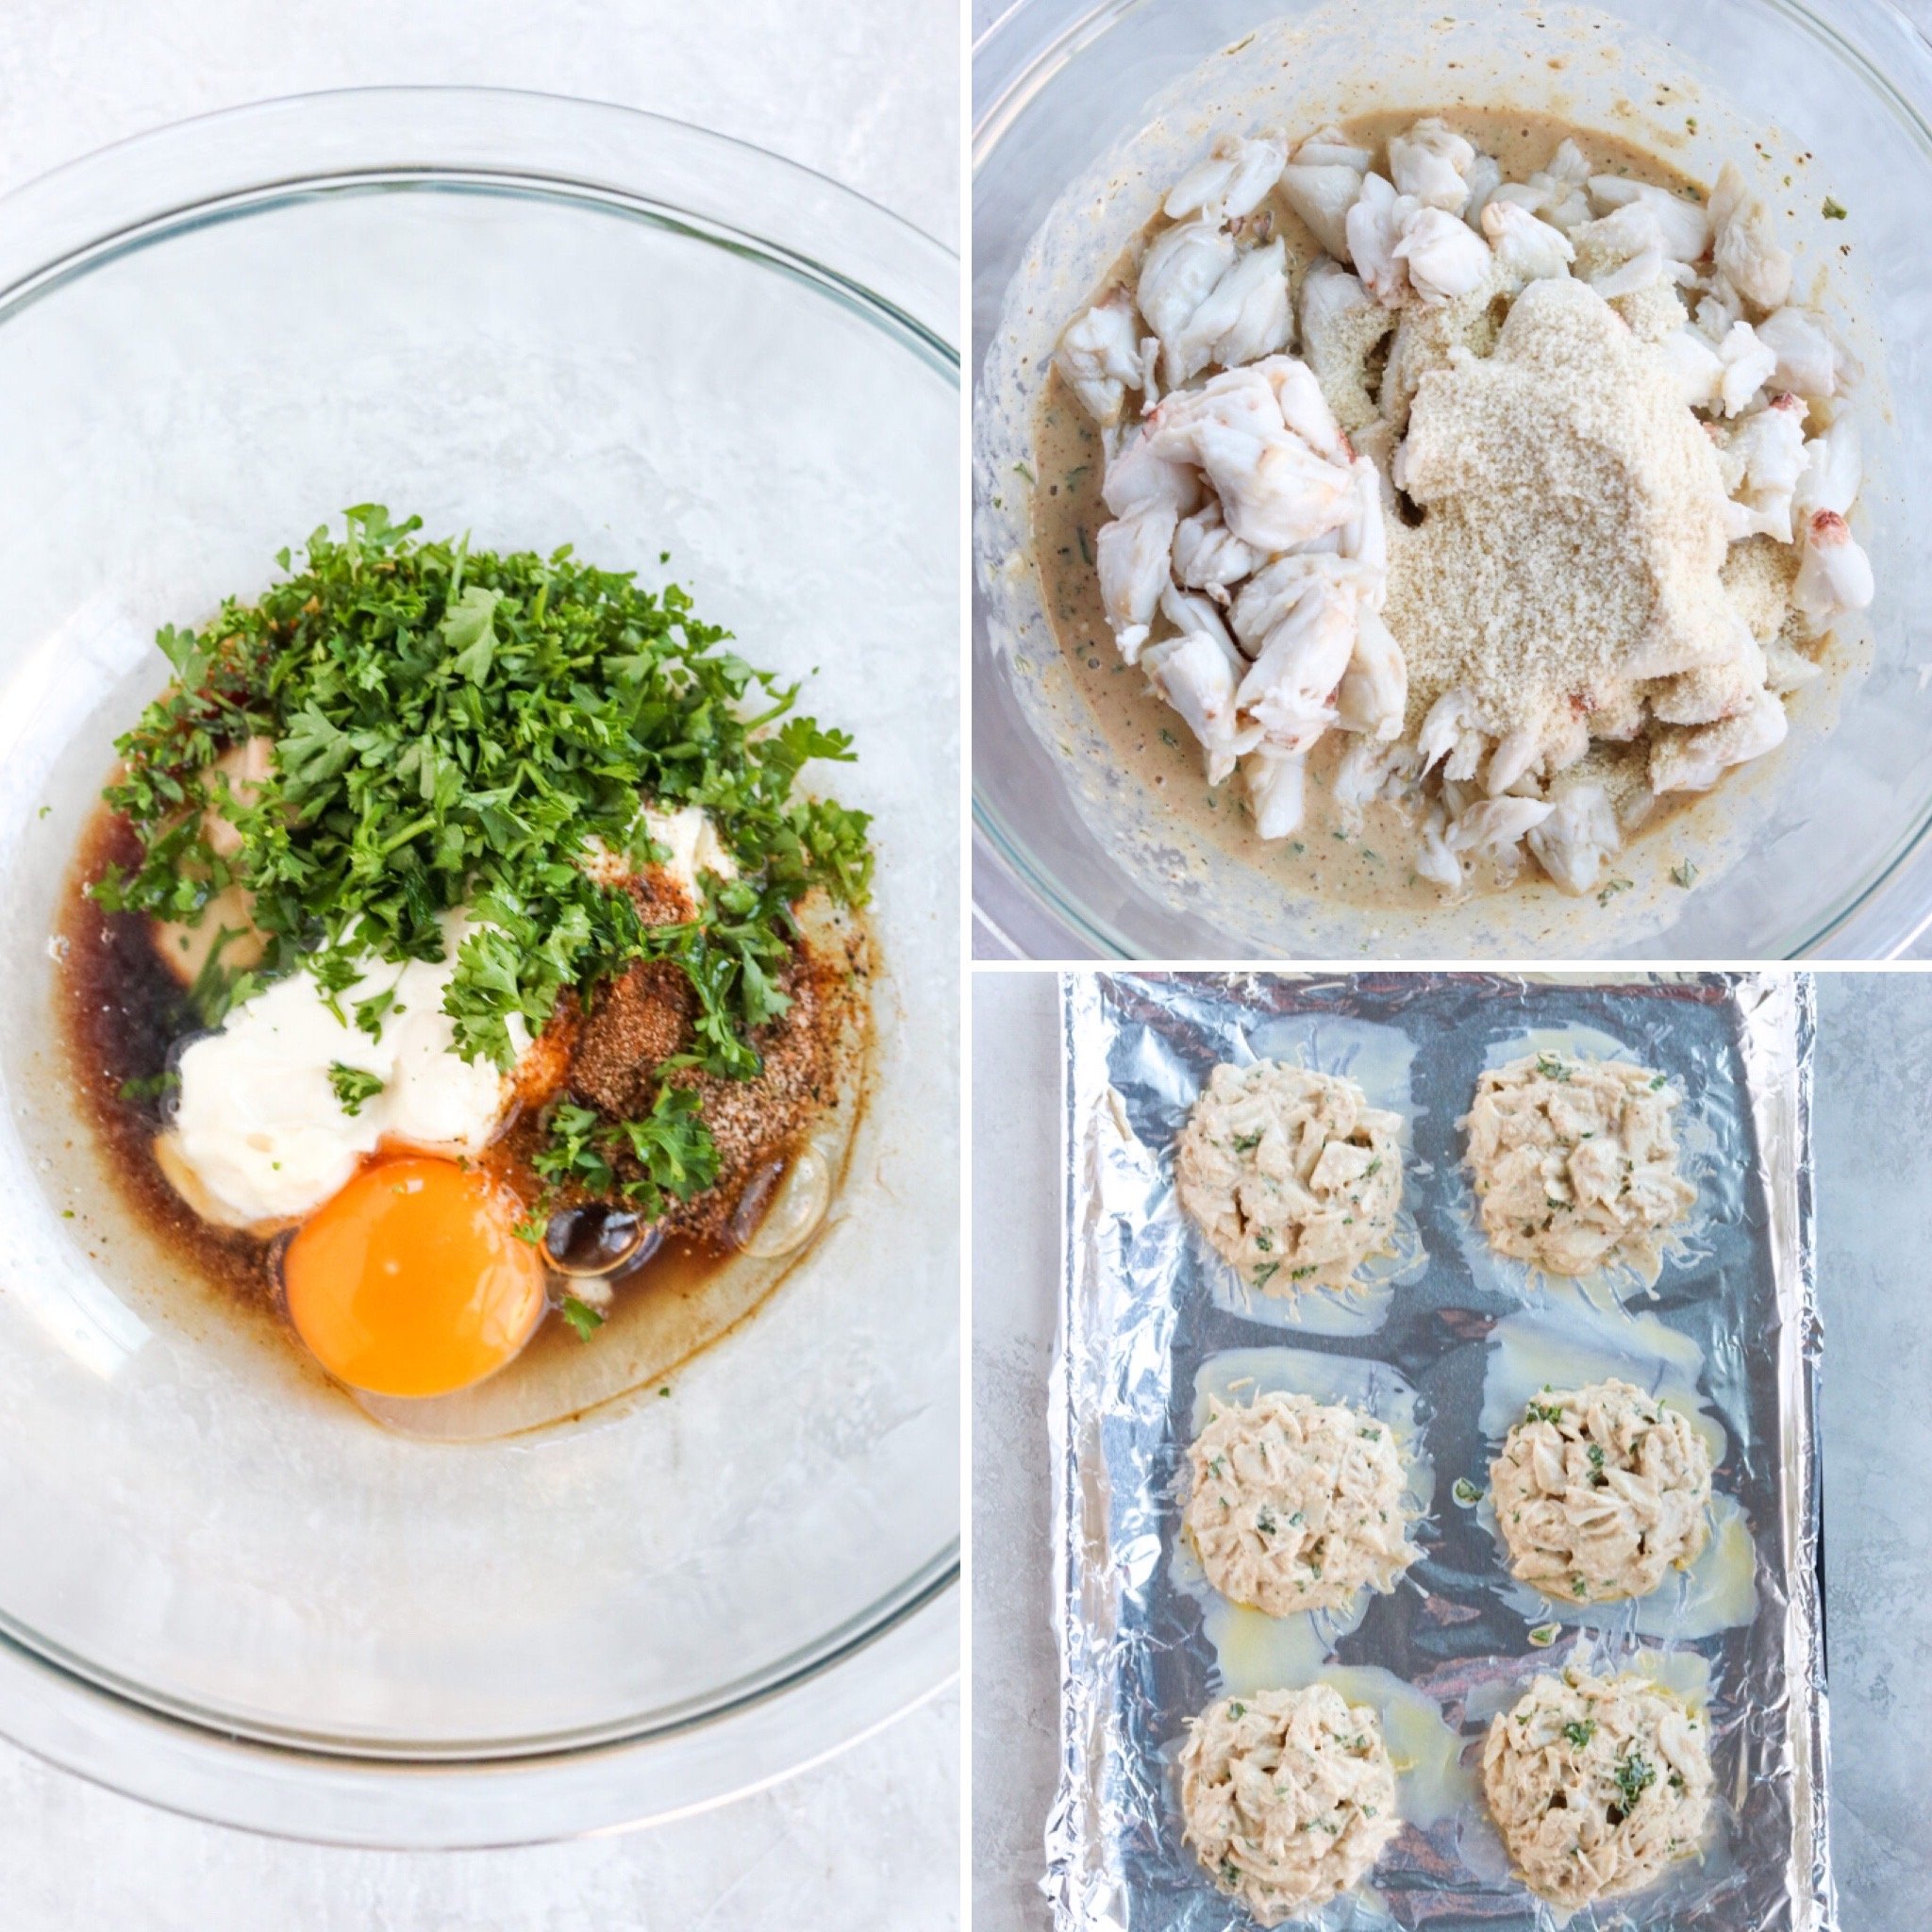 3 photos showing how to form crab cakes